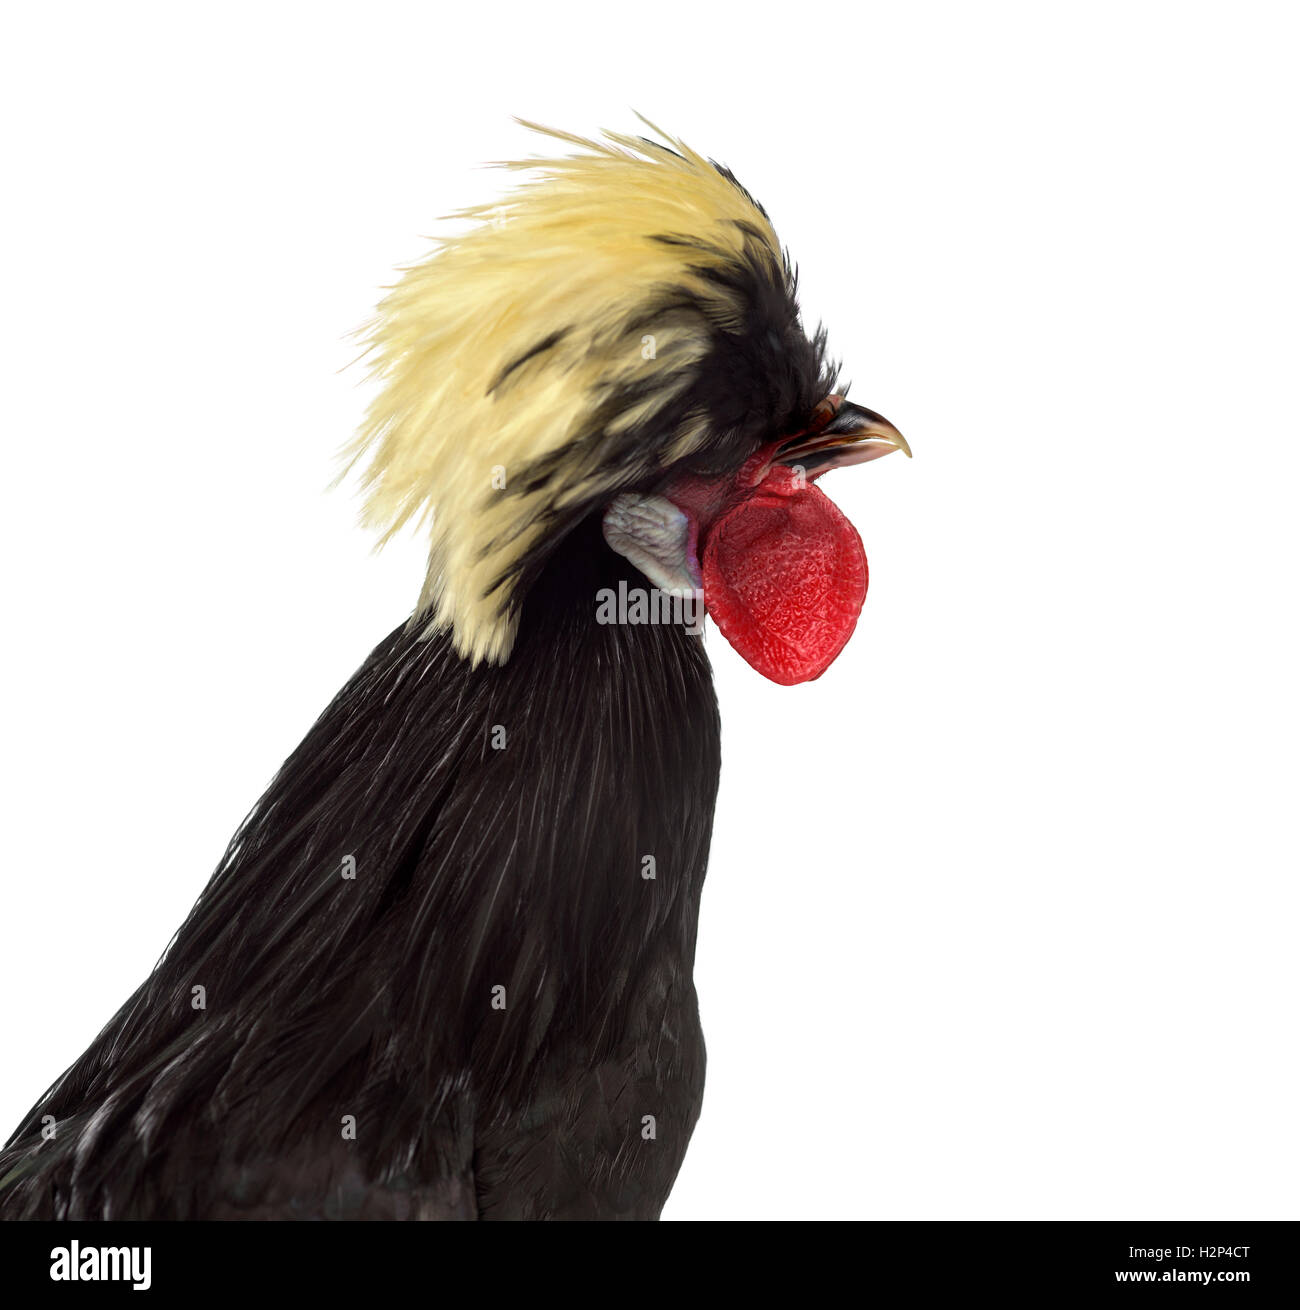 Close-up of a side view of a Polish Rooster on White background Stock Photo